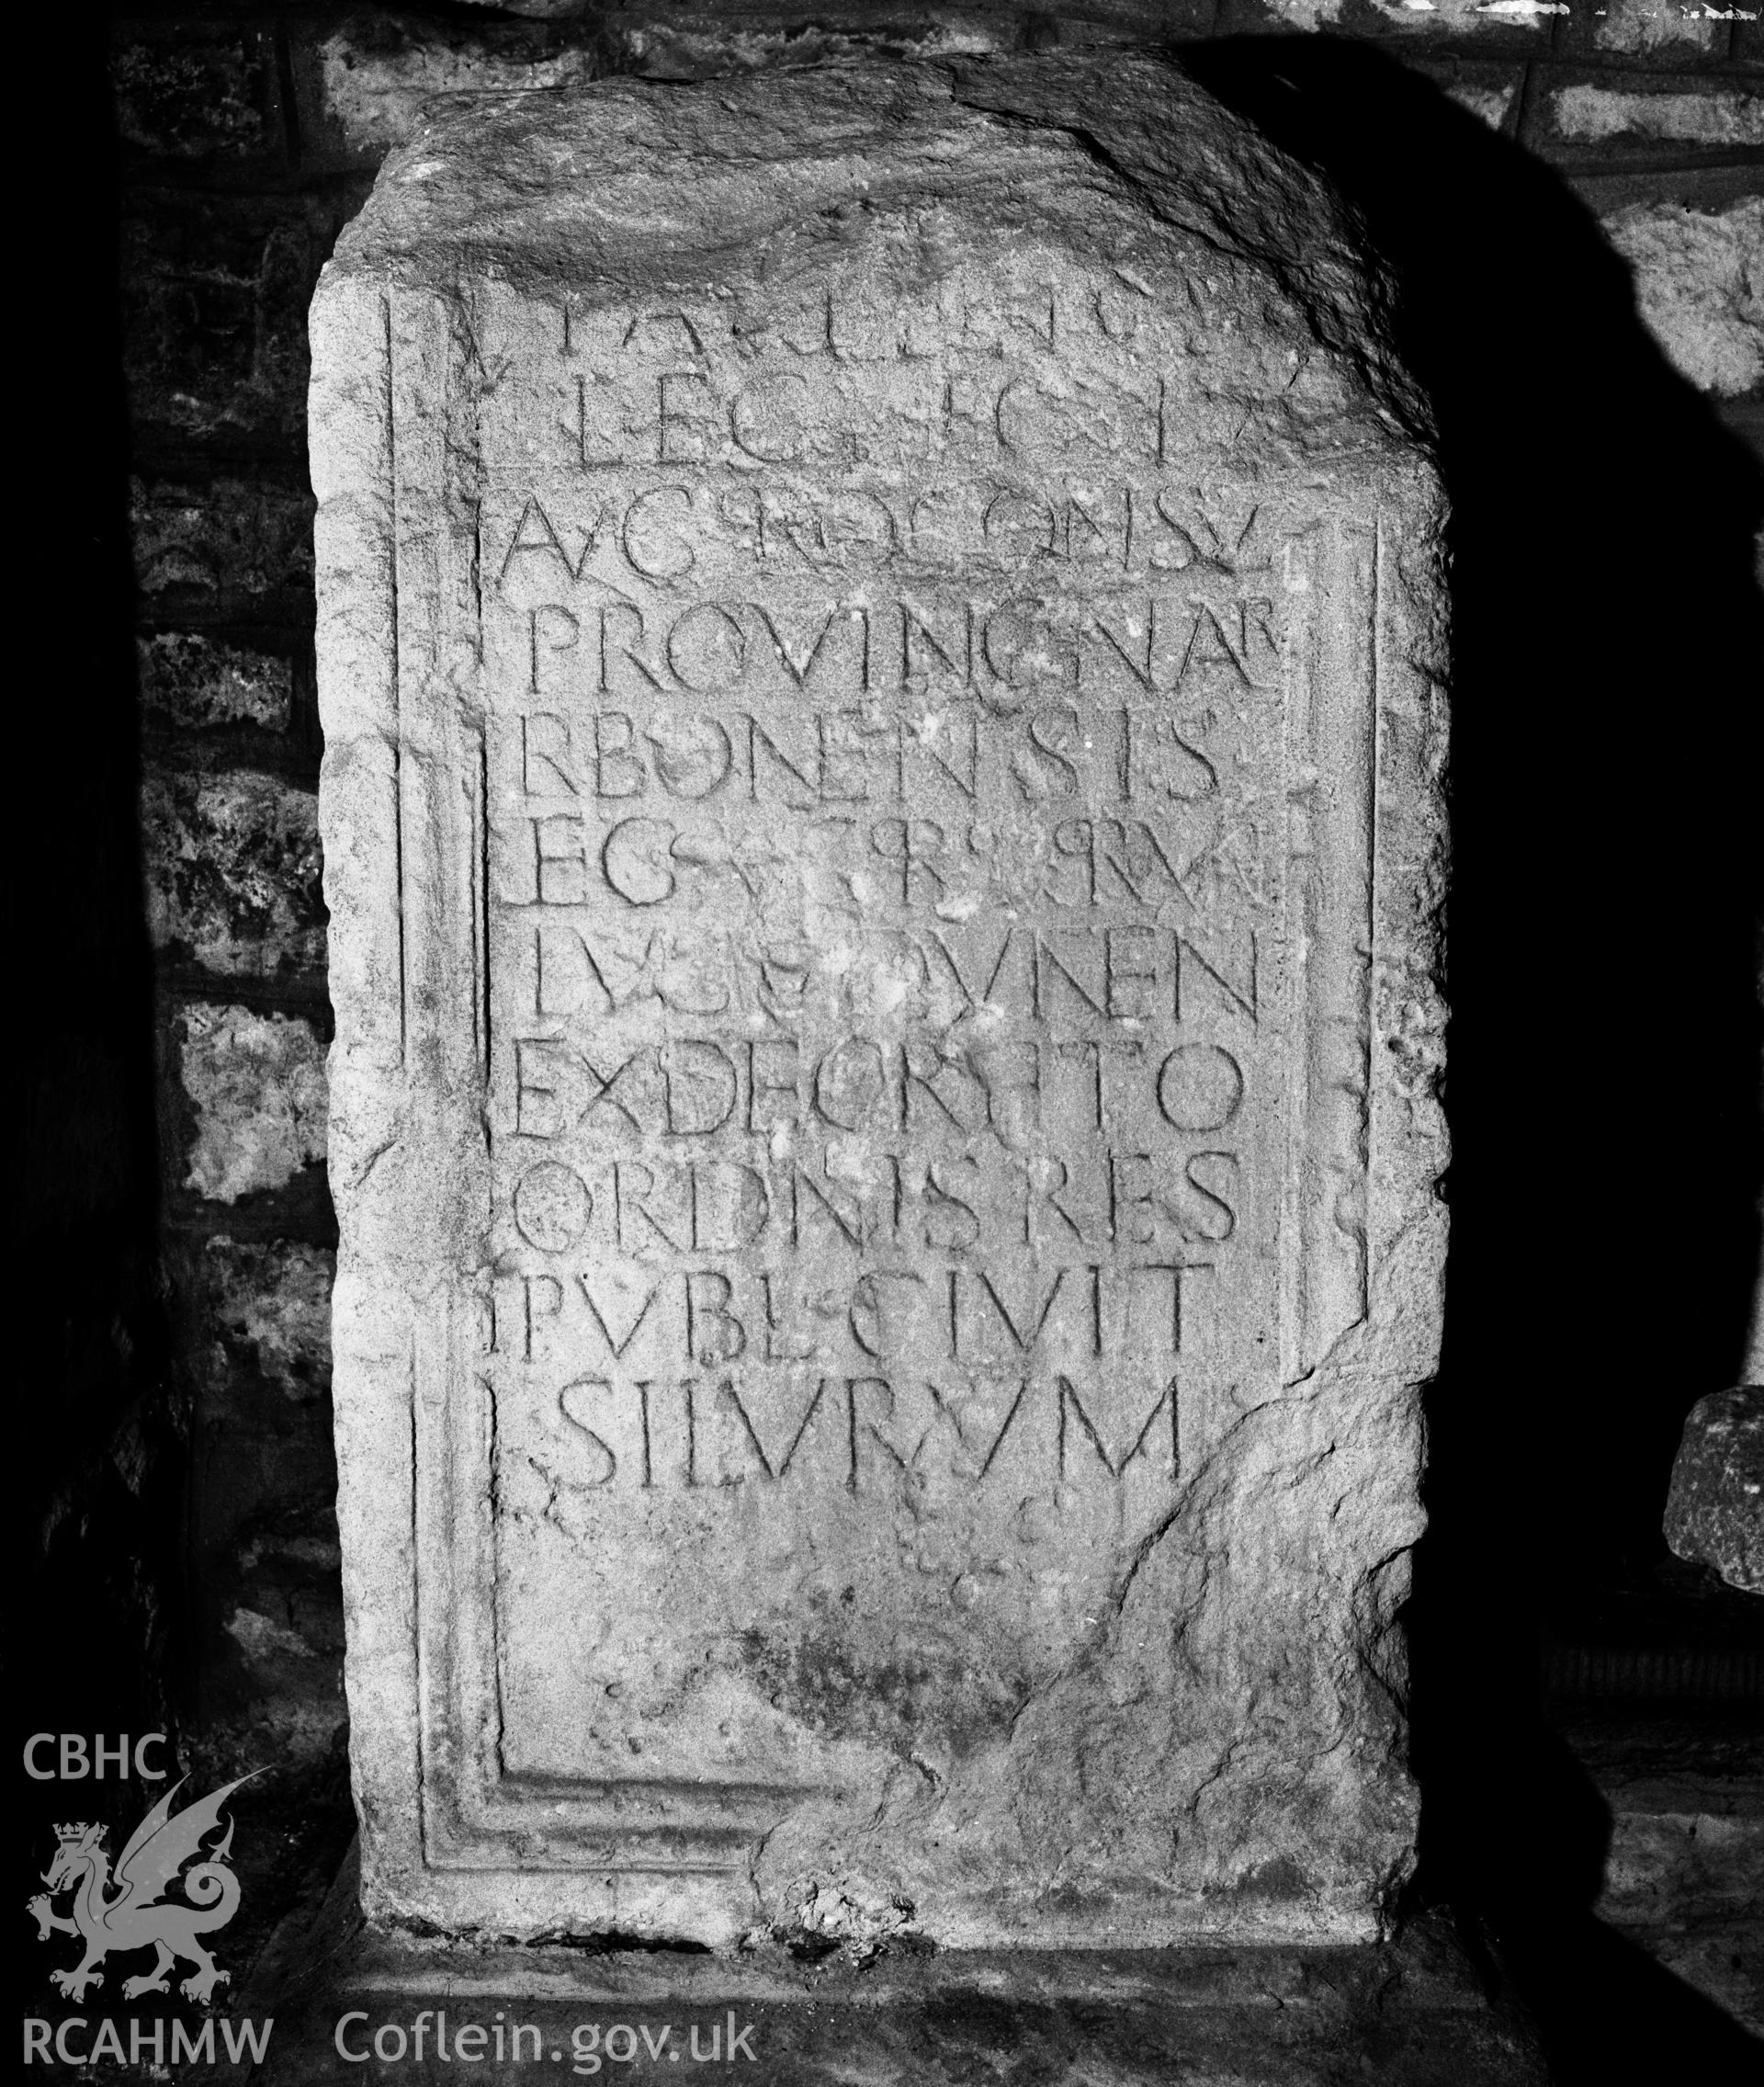 Black and white photograph showing the Silurum or Paulinus Stone at St Stephen's Church, Caerwent.